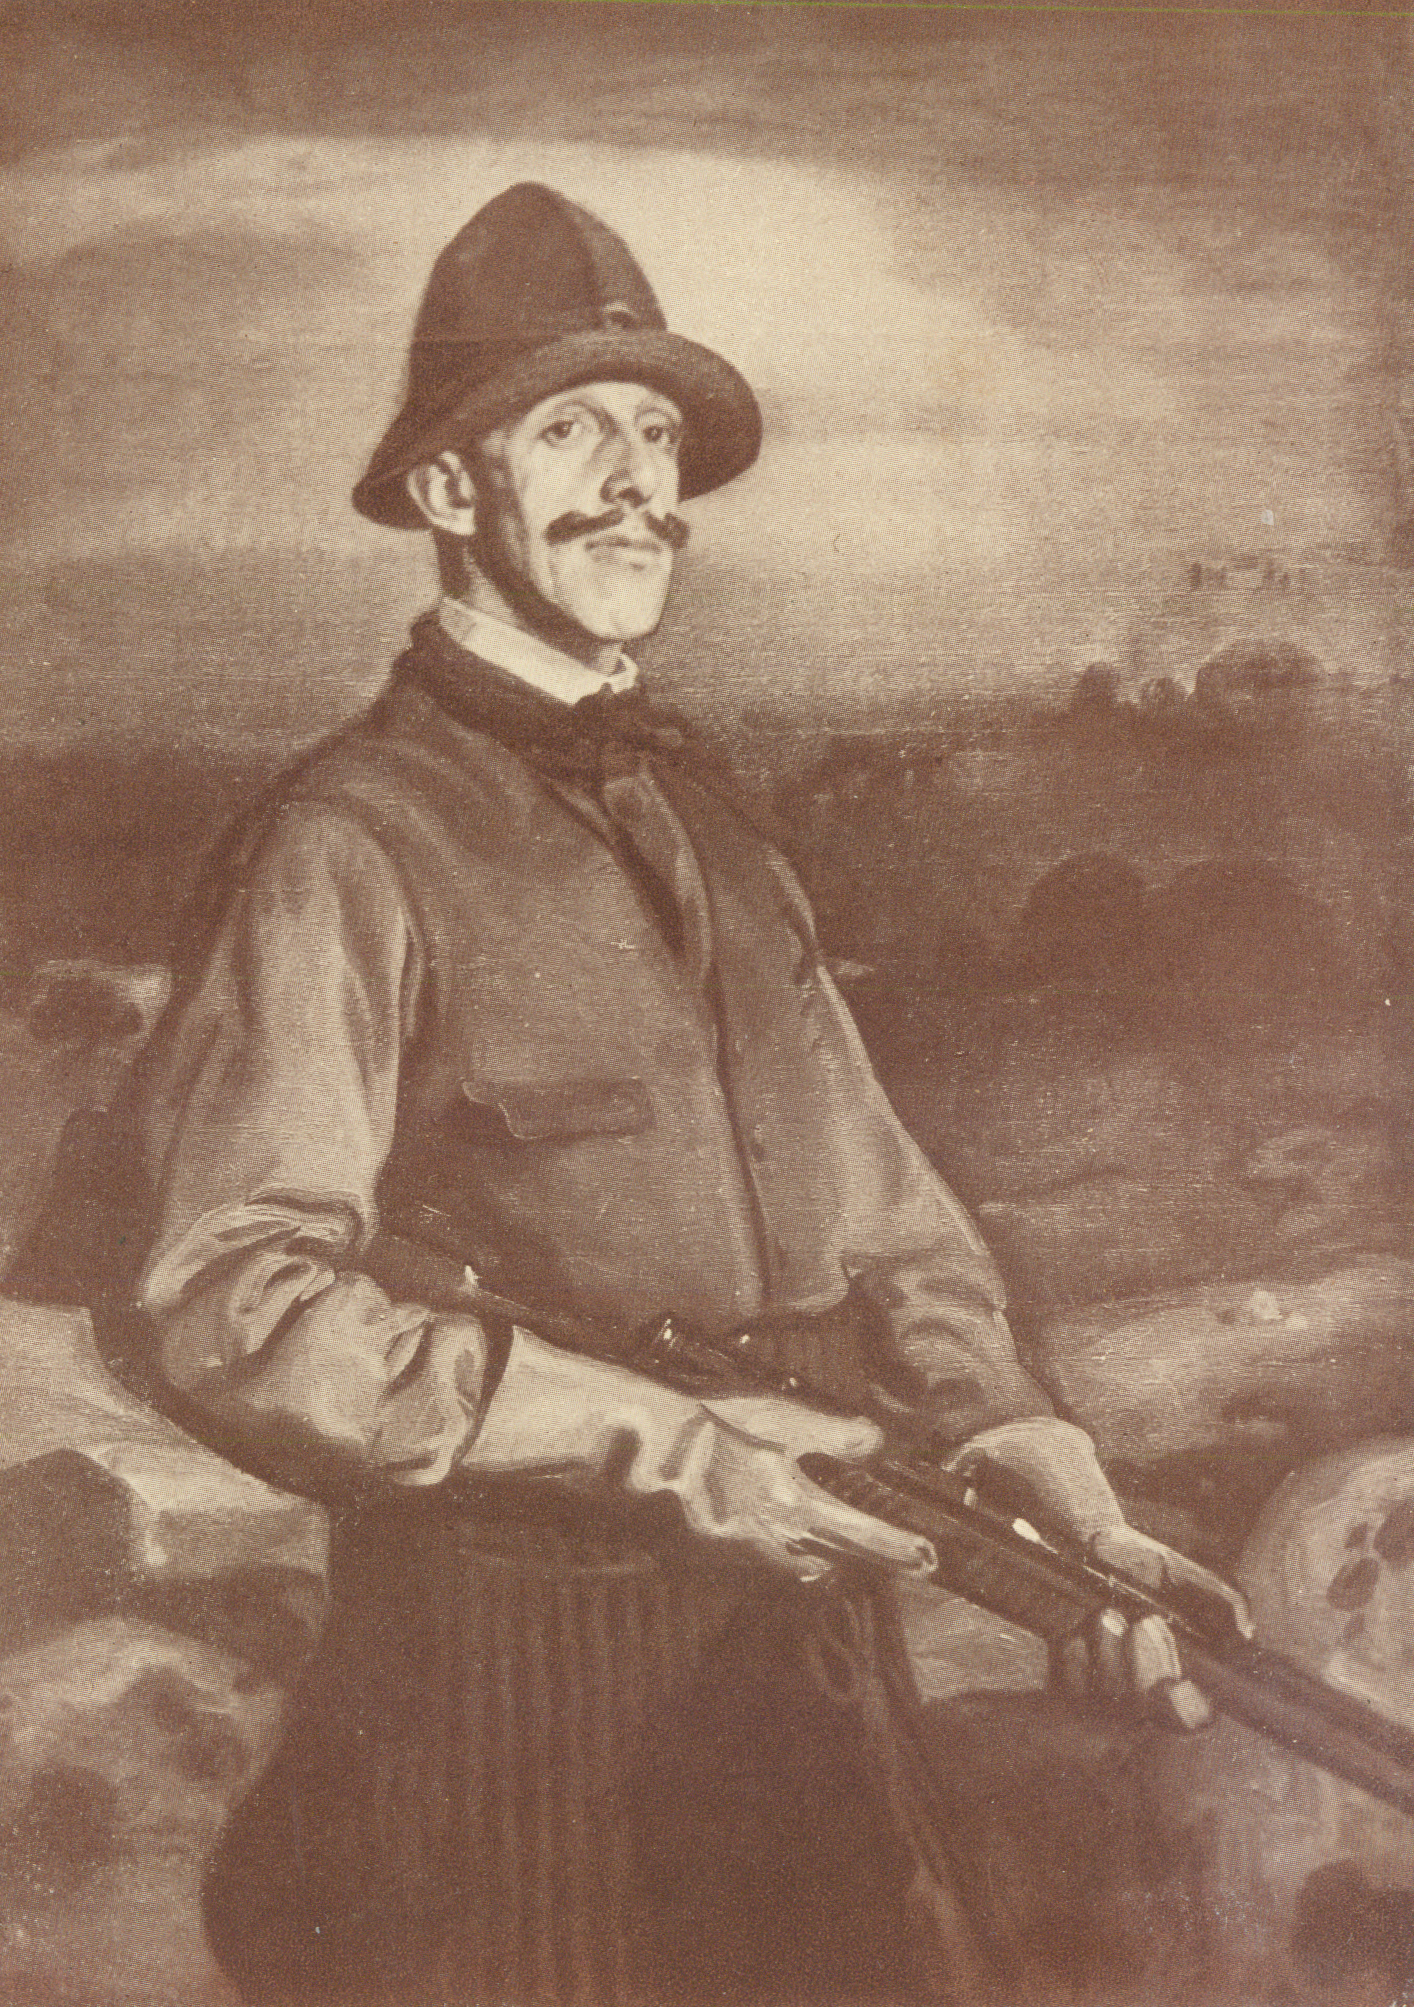 Image of the king outside holding a rifle and wearing a hunting costume.